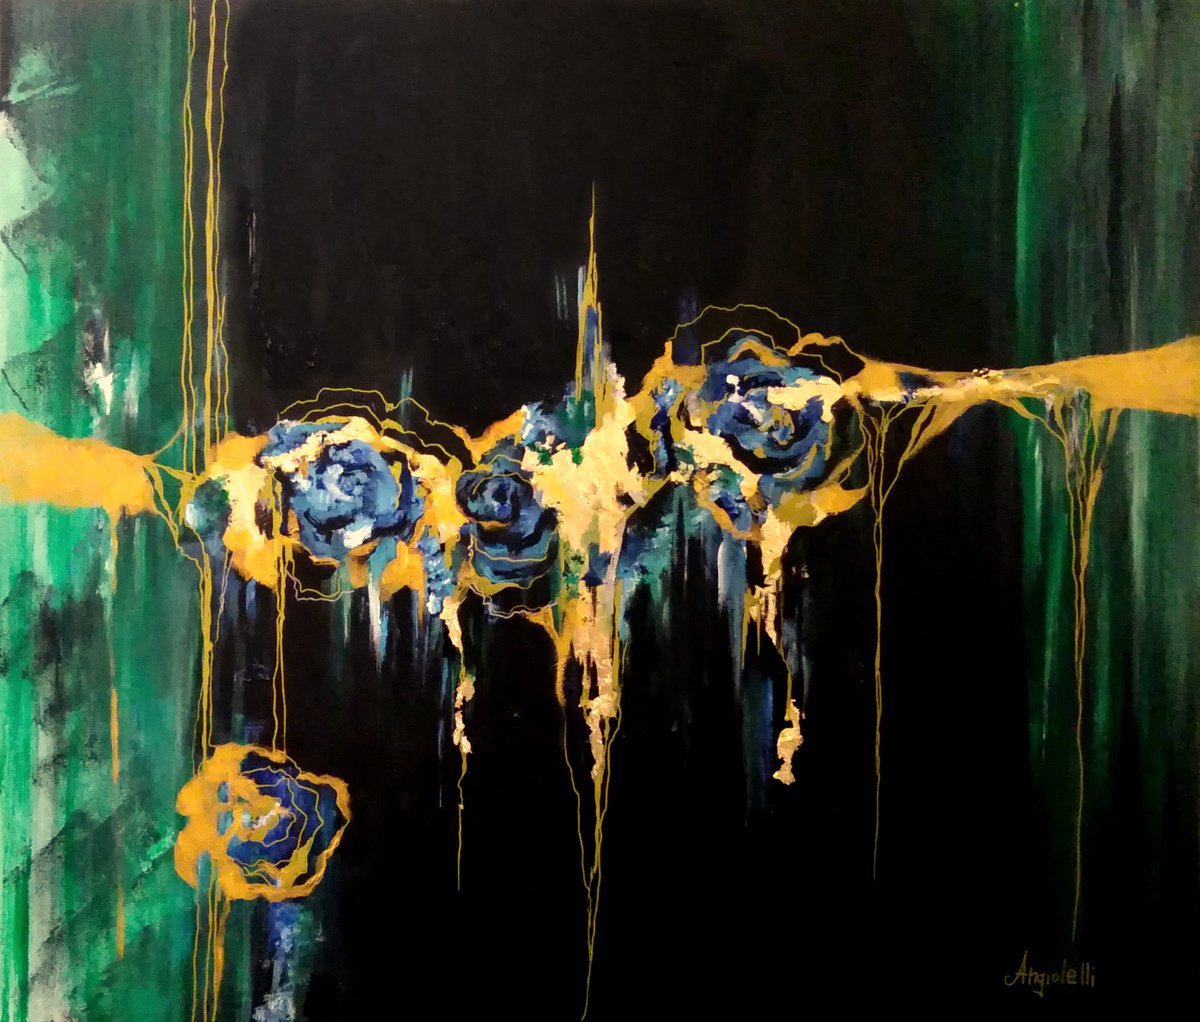 Blue roses - acrylic painting, original painting, abstract by Anna Rita Angiolelli